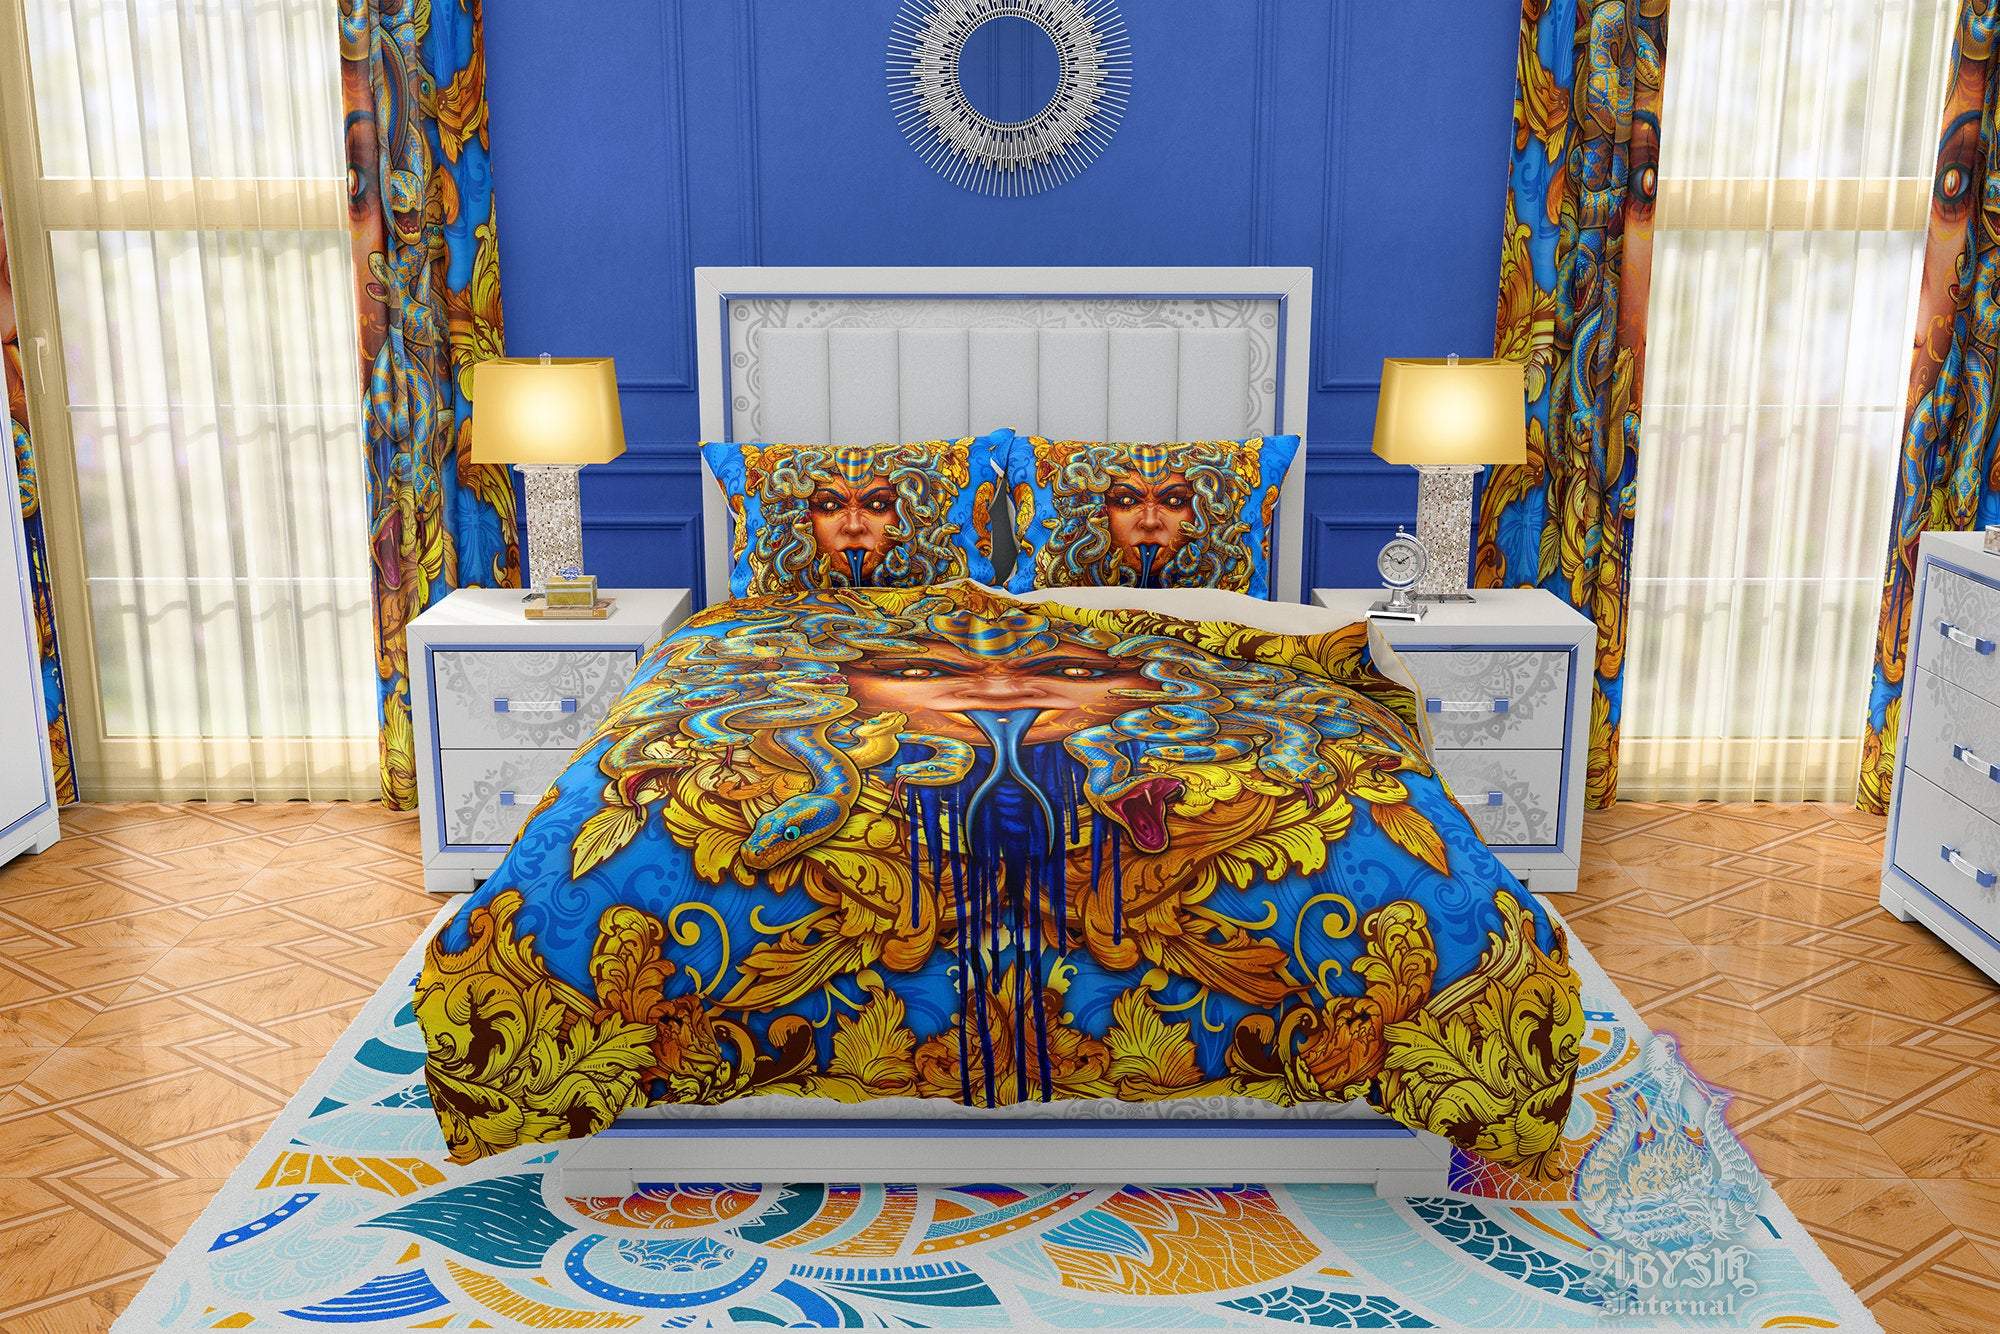 Medusa Bedding Set, Comforter and Duvet, Indie Bed Cover, Victorian Bedroom Decor, King, Queen and Twin Size - Cyan and Gold - Abysm Internal